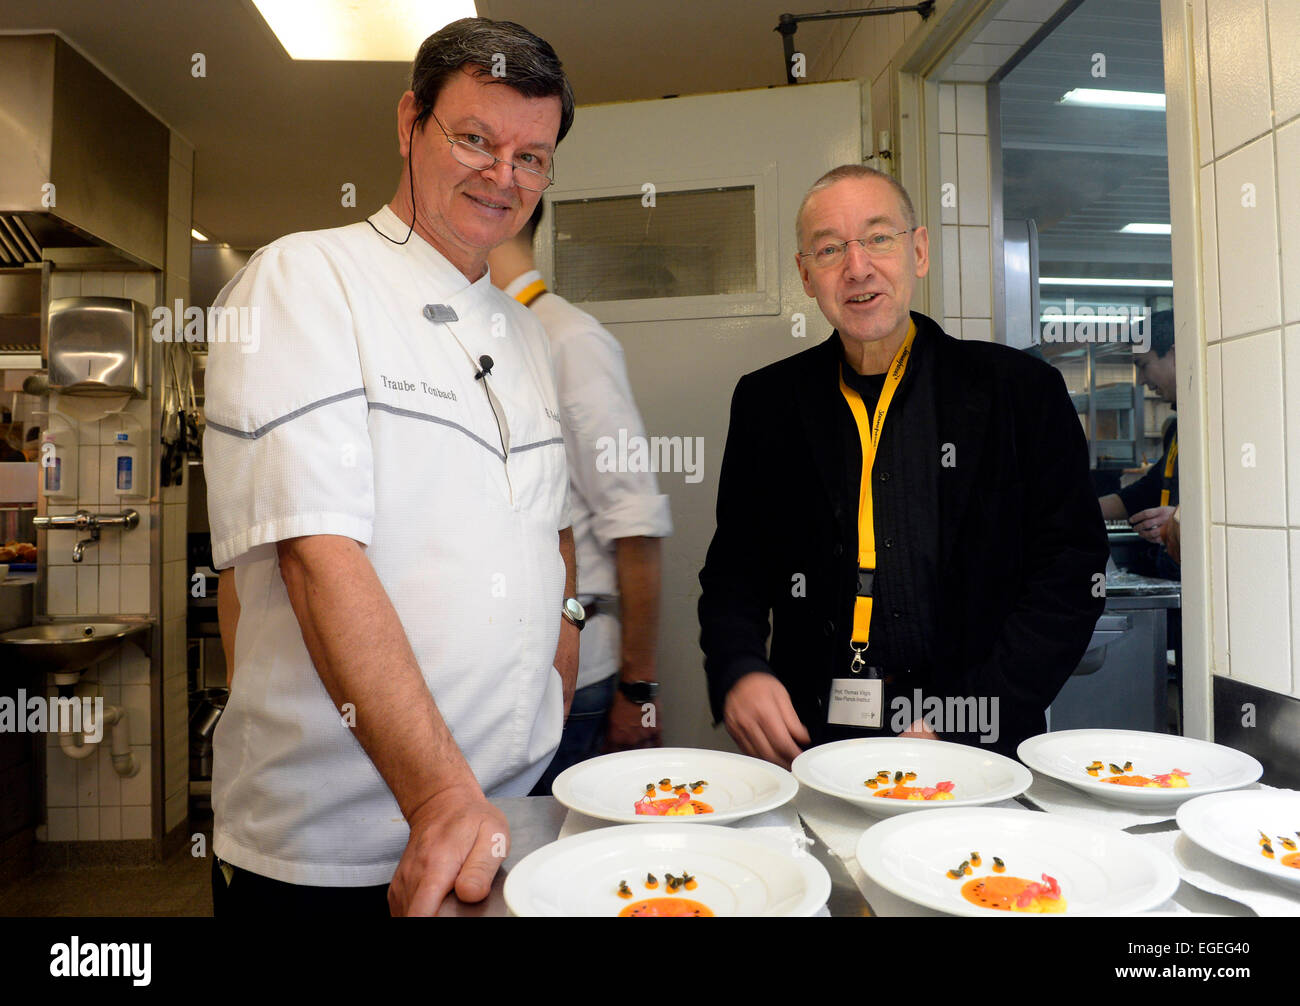 Baiersbronn, Germany. 23rd Feb, 2015. Three-star chef Harald Wohlfahrt (L) and food expert Thomas Vilgis in the kitchen of the restaurant Traube-Tonbach during CookTank in Baiersbronn, Germany, 23 February 2015. CookTank considers itself a sort of cooking and think tank, in which top chefs, media representatives, producers, and experts develop ideas and strategies for tomorrow's cuisine. Photo: Thomas Kienzle/dpa/Alamy Live News Stock Photo